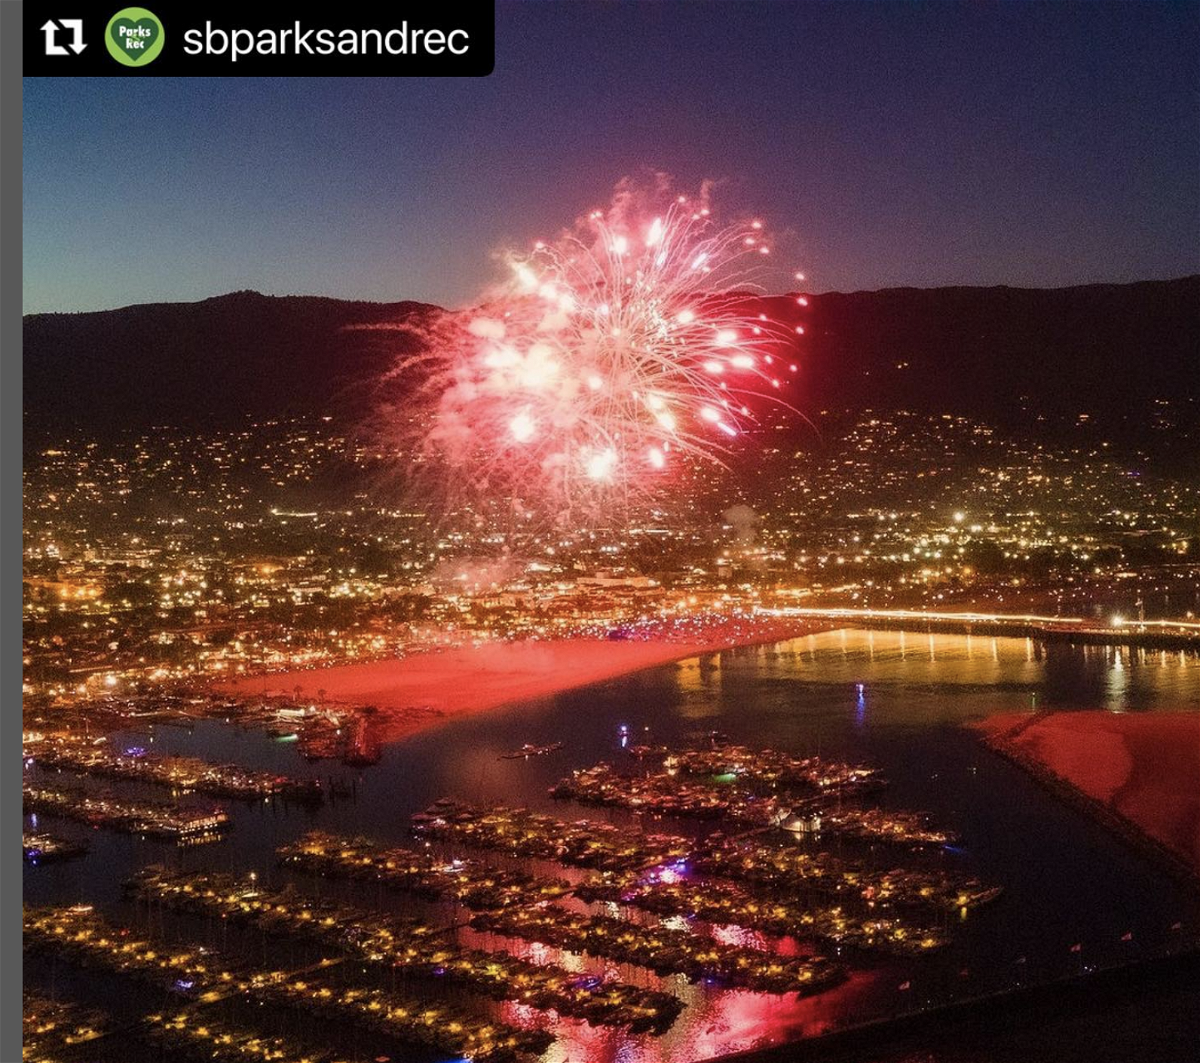 The Santa Barbara 4th of July fireworks will take place at 9 p.m.